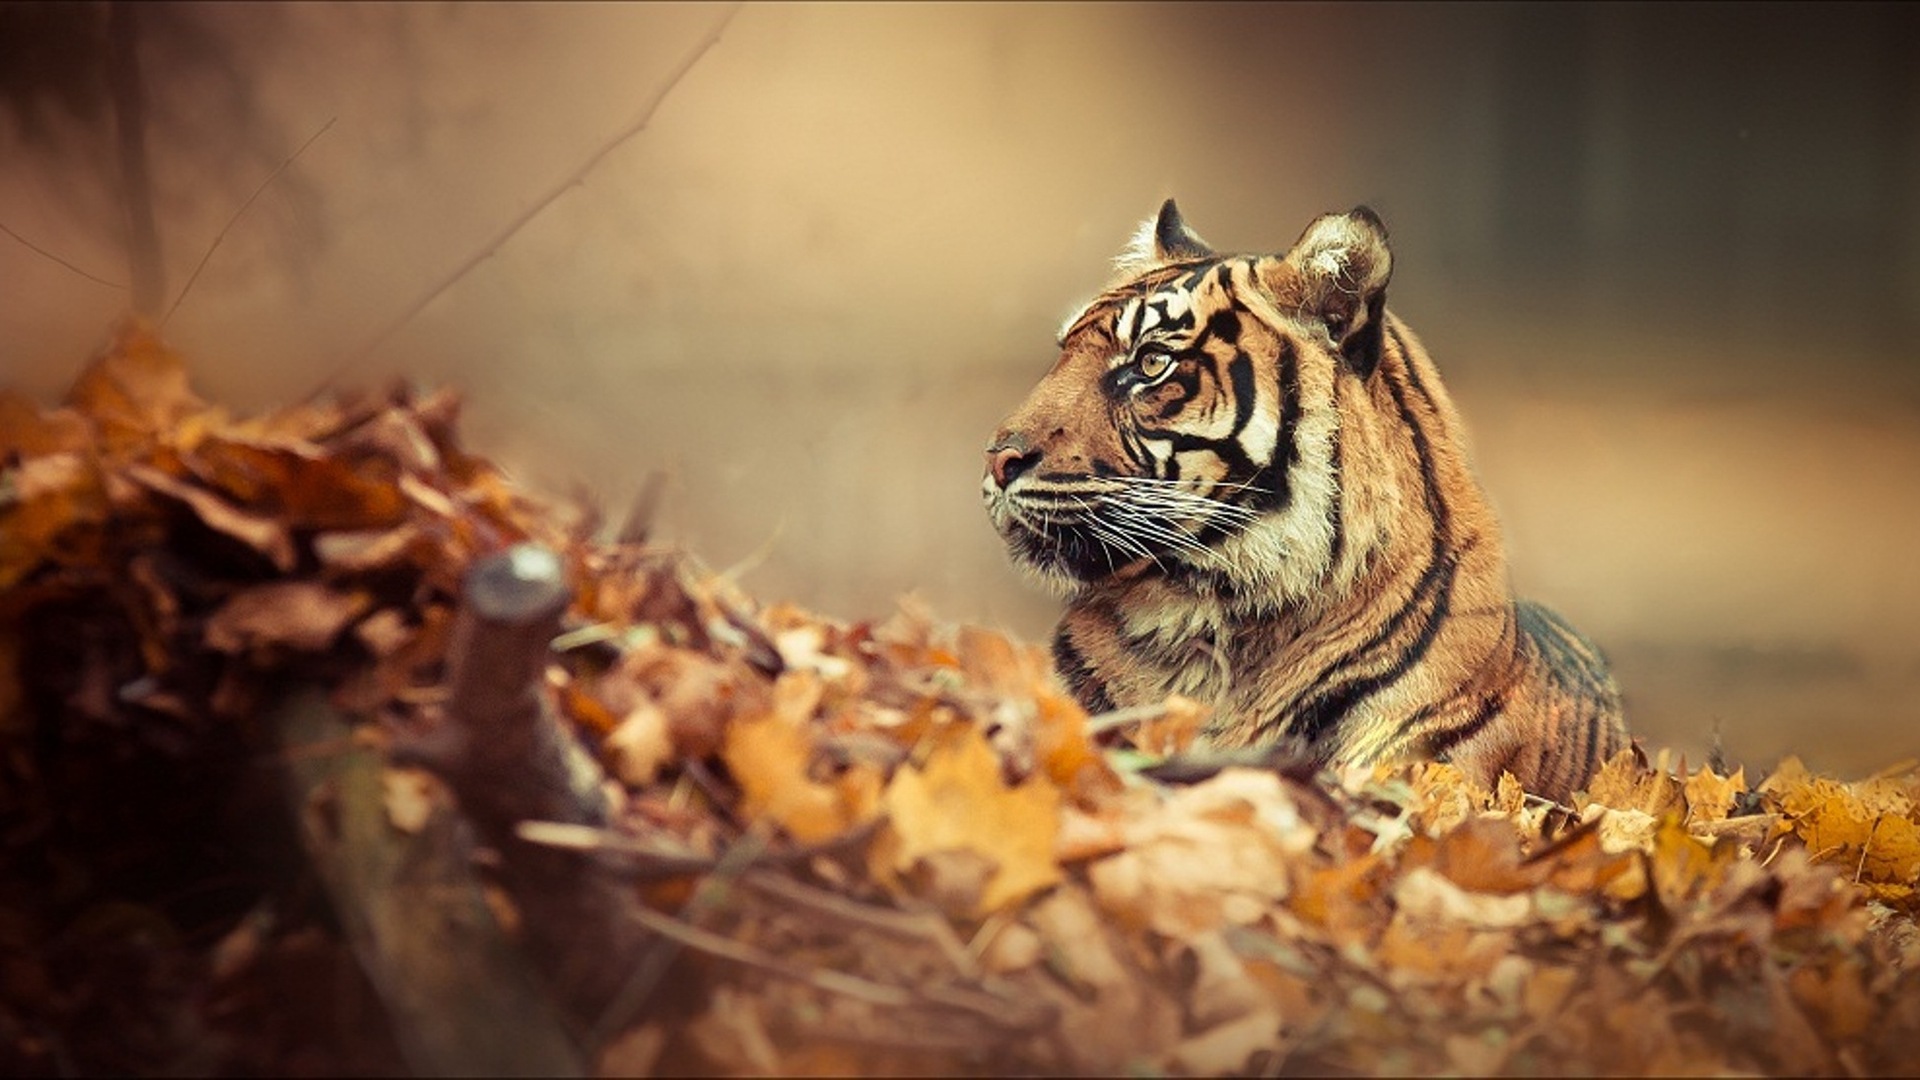 Tiger HD Wallpaper Pictures 1080p